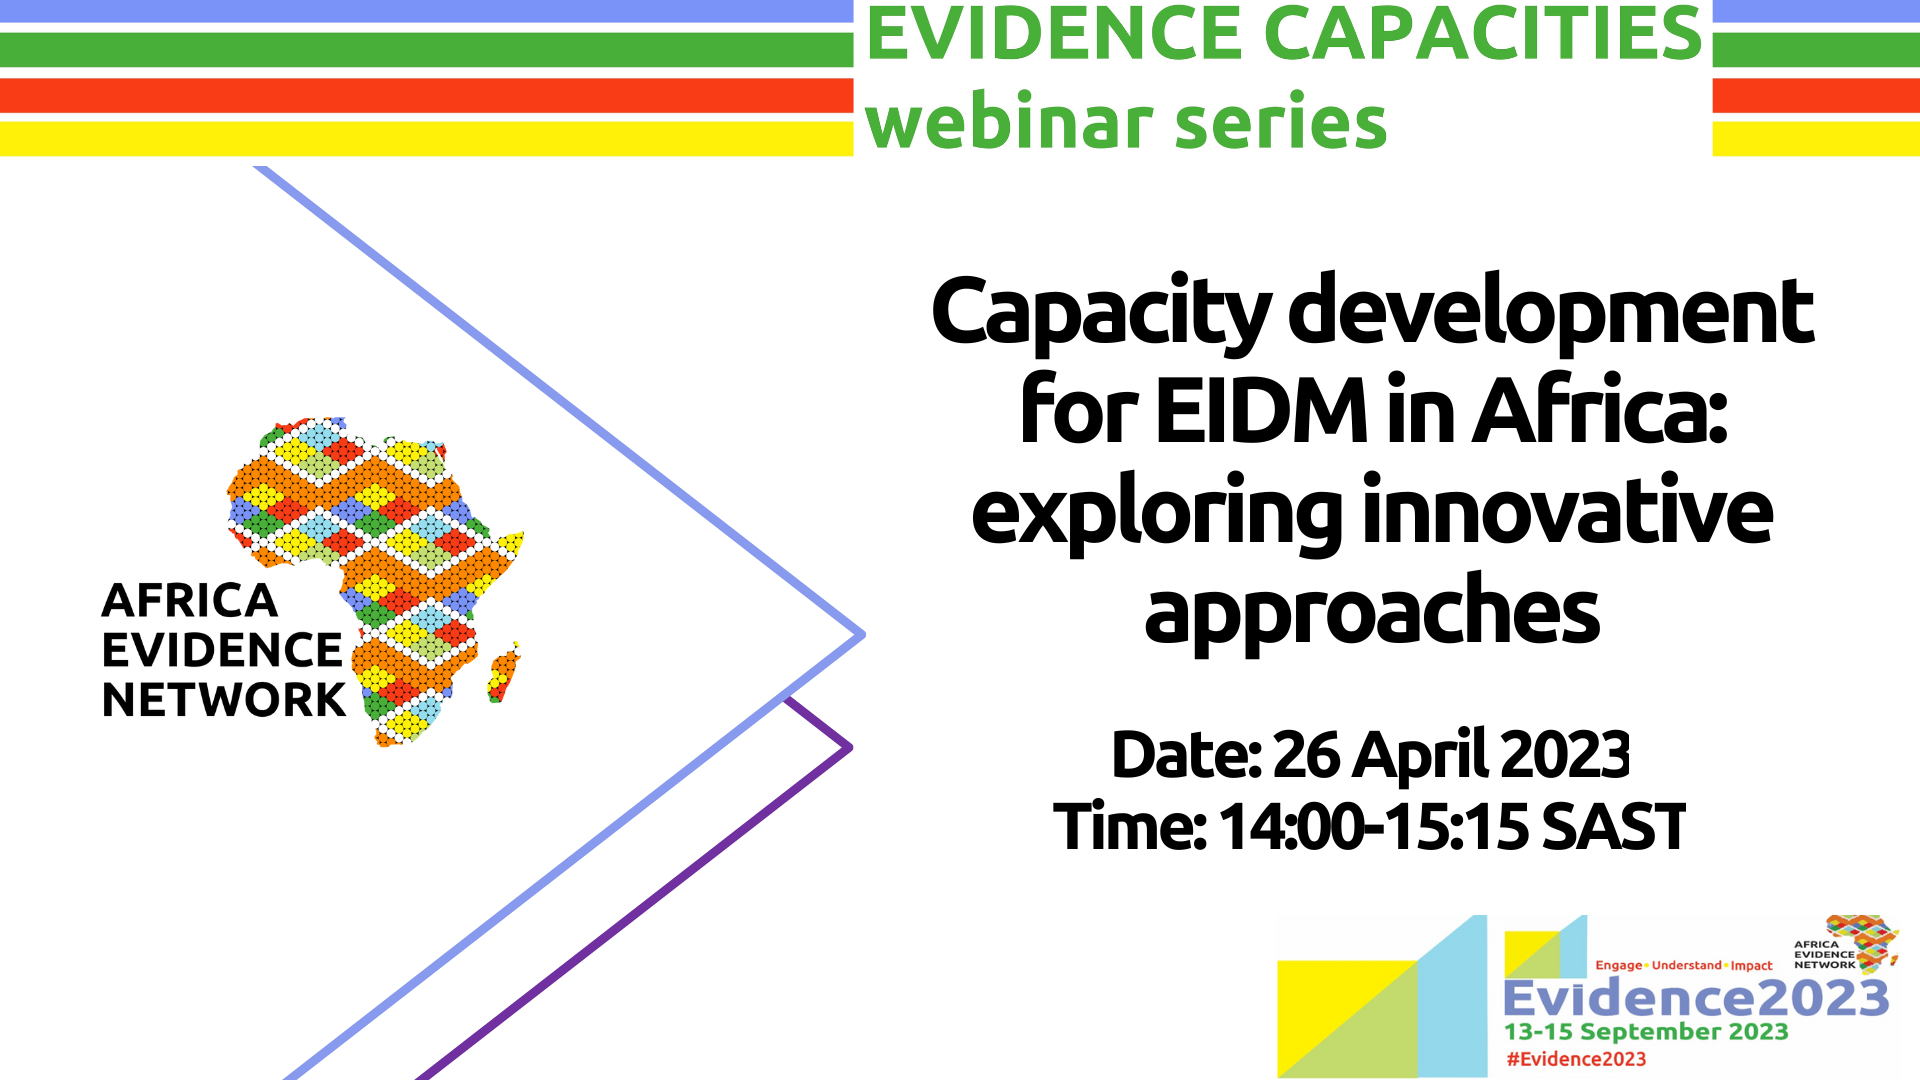 EVENT UPDATE | Capacity development for EIDM in Africa: exploring innovative approaches